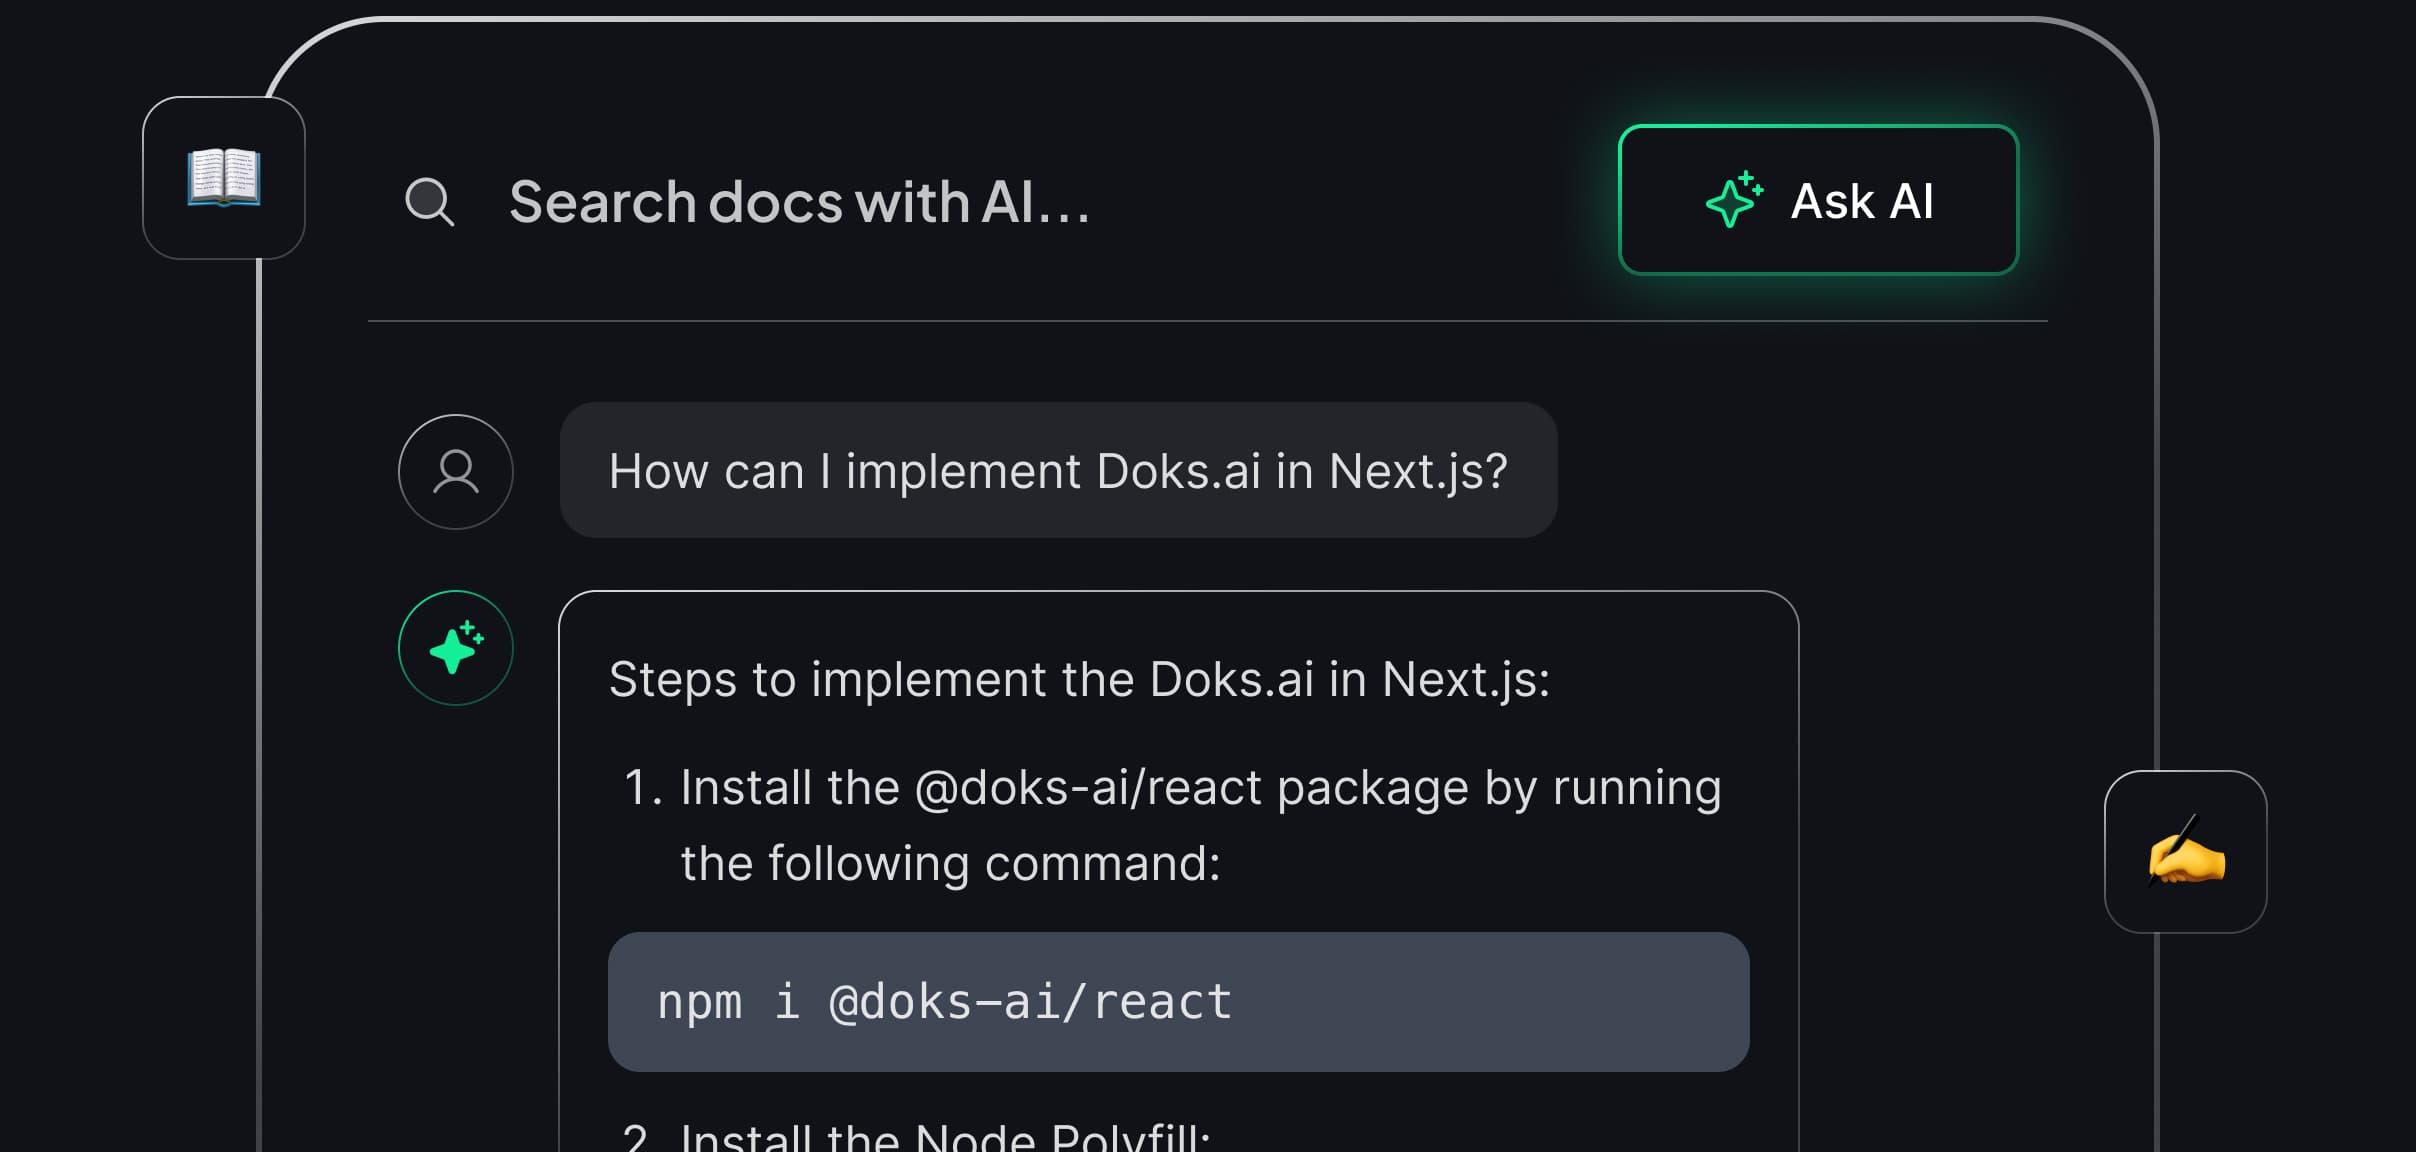 Doks.ai is a platform that allows you to build, train, and deploy custom ChatGPT chatbots with ease, providing seamless integration with your website and other communication channels.